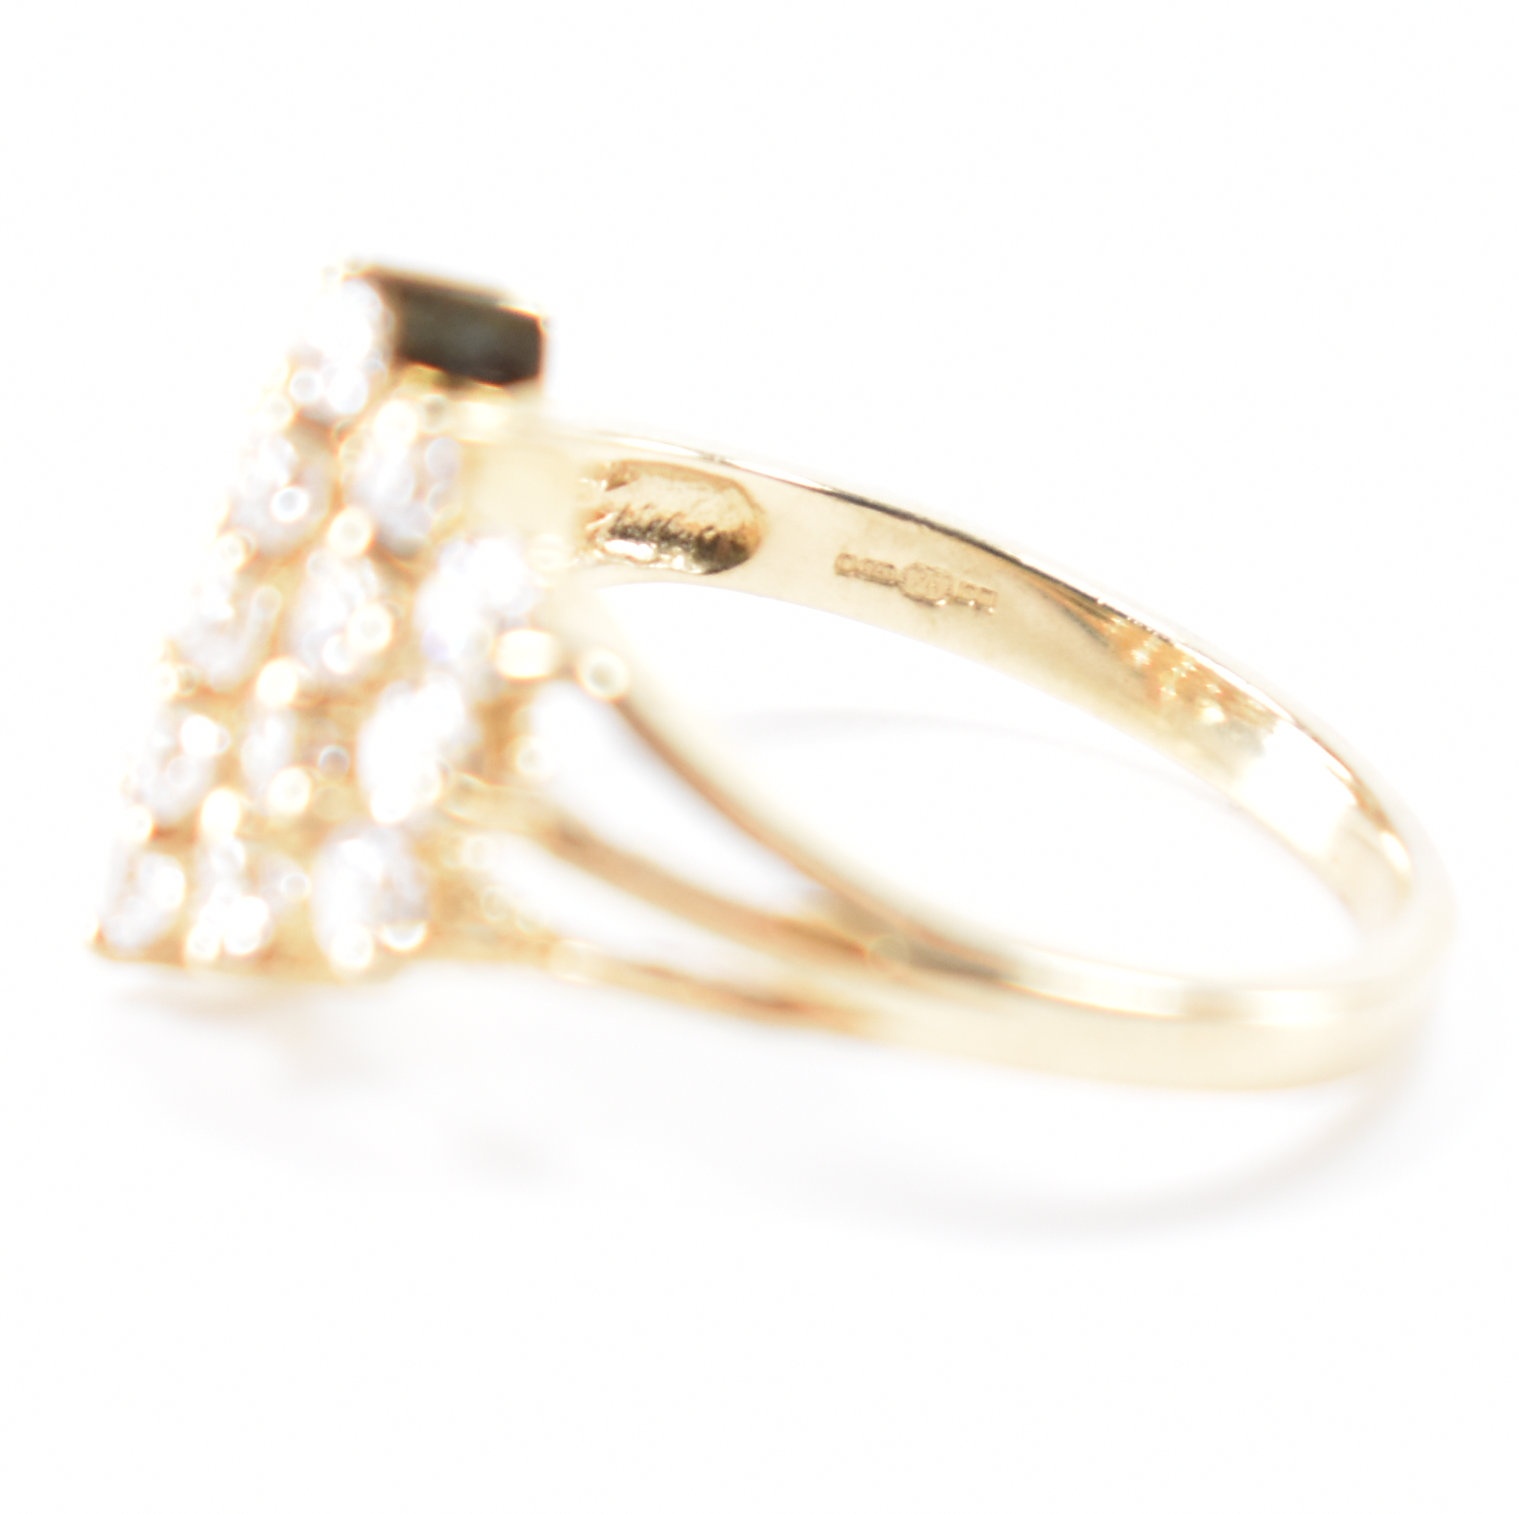 HALLMARKED 9CT GOLD CZ CLUSTER RING - Image 6 of 8